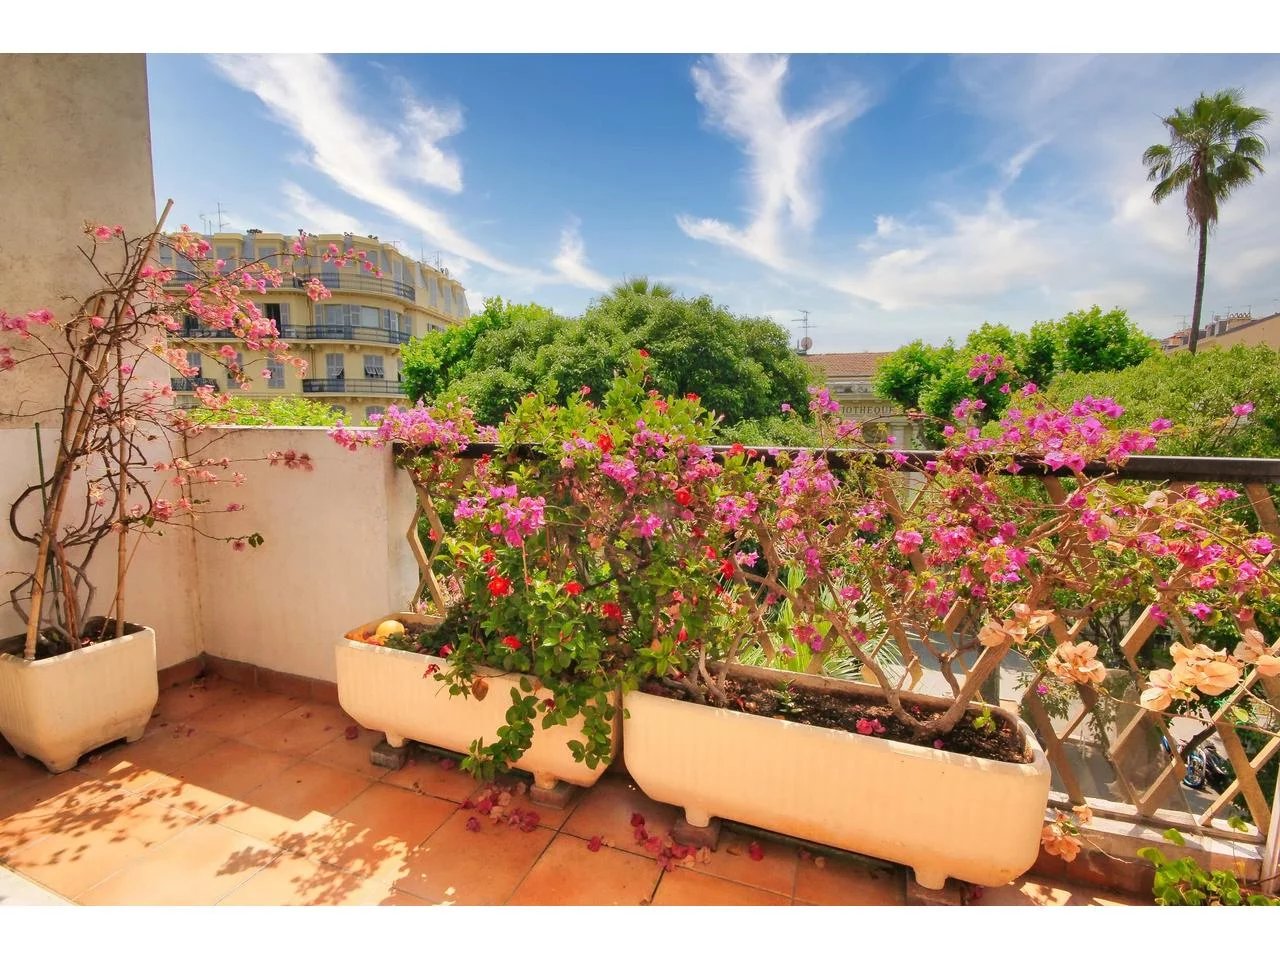 Appartement  3 Rooms 81.01m2  for sale   599 000 €